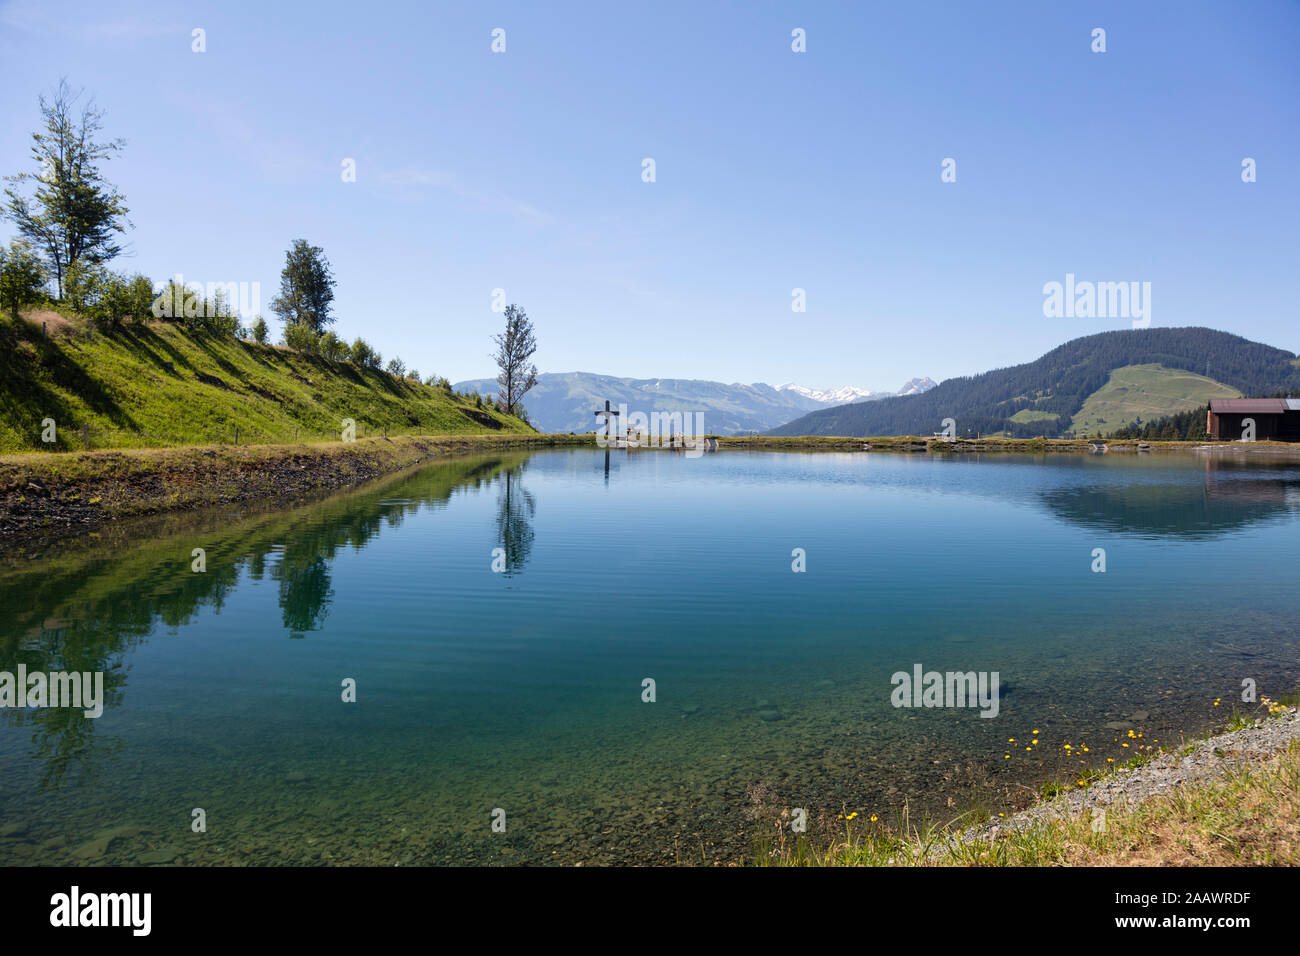 Scenic view of Astbergsee lake against clear sky at Astberg, Kitzbühel, Tyrol, Austria Stock Photo